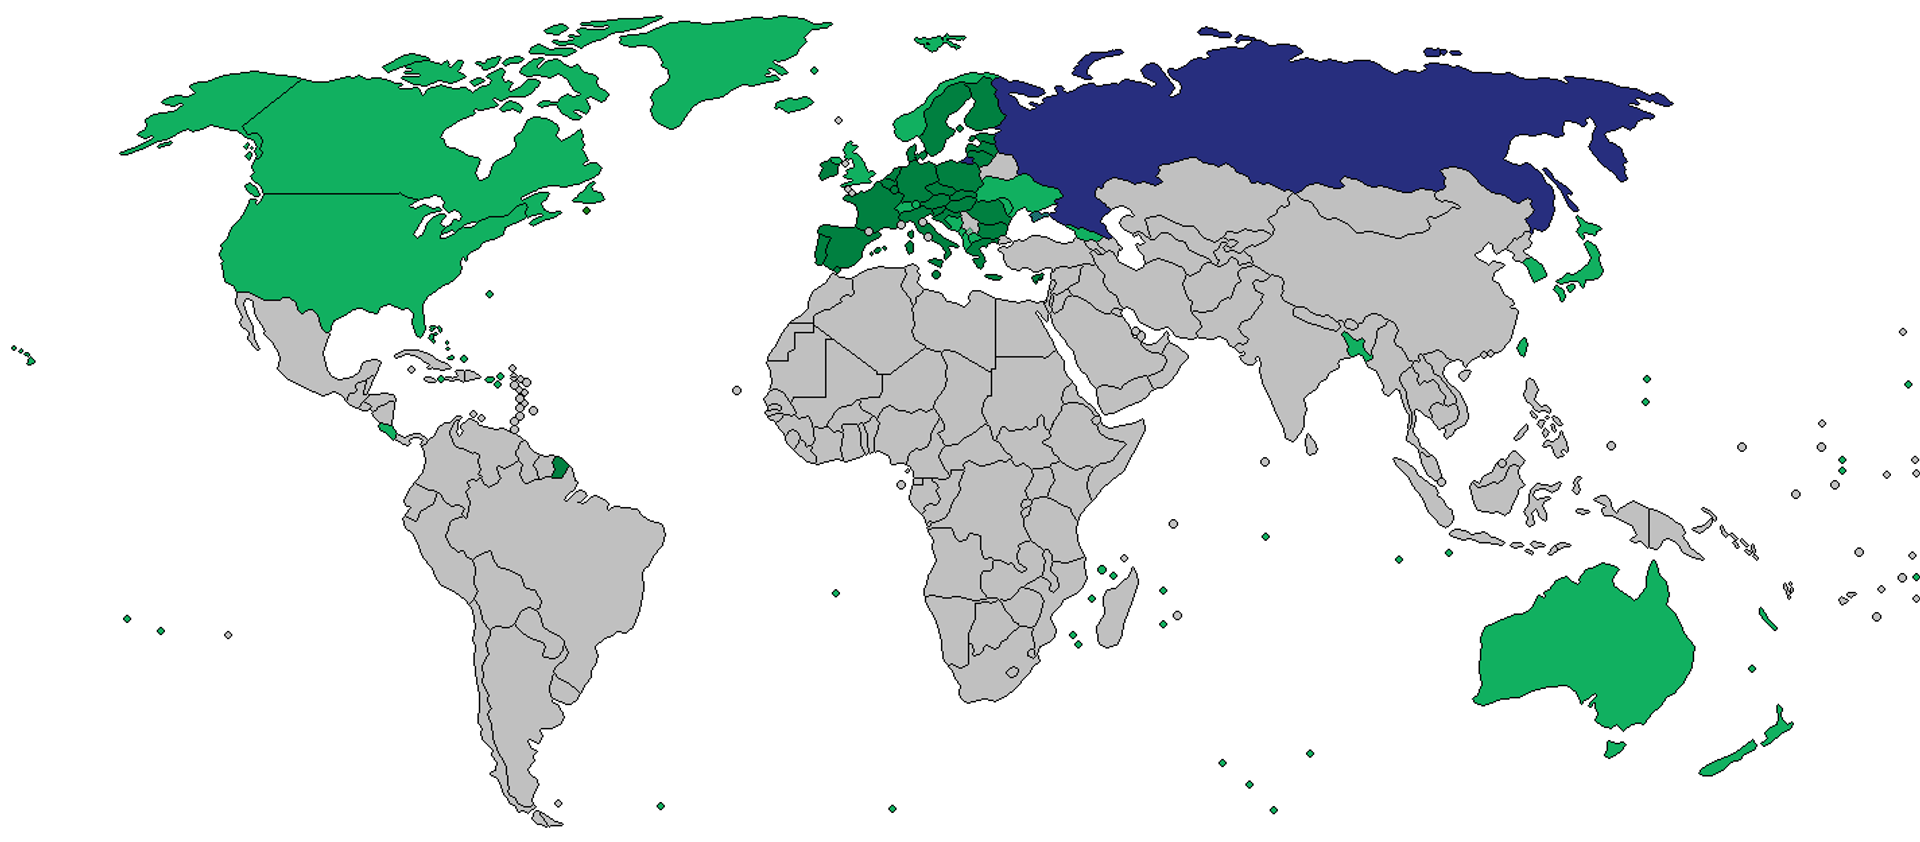 Map showing countries which have slapped sanctions on Russia (in green) after the escalation of the Donbass crisis into a full-blown NATO-Russia proxy war in Ukraine. The image shows that the vast majority of nations in the so-called Global South refrained from introducing restrictions on Moscow. - Sputnik Africa, 1920, 18.08.2023